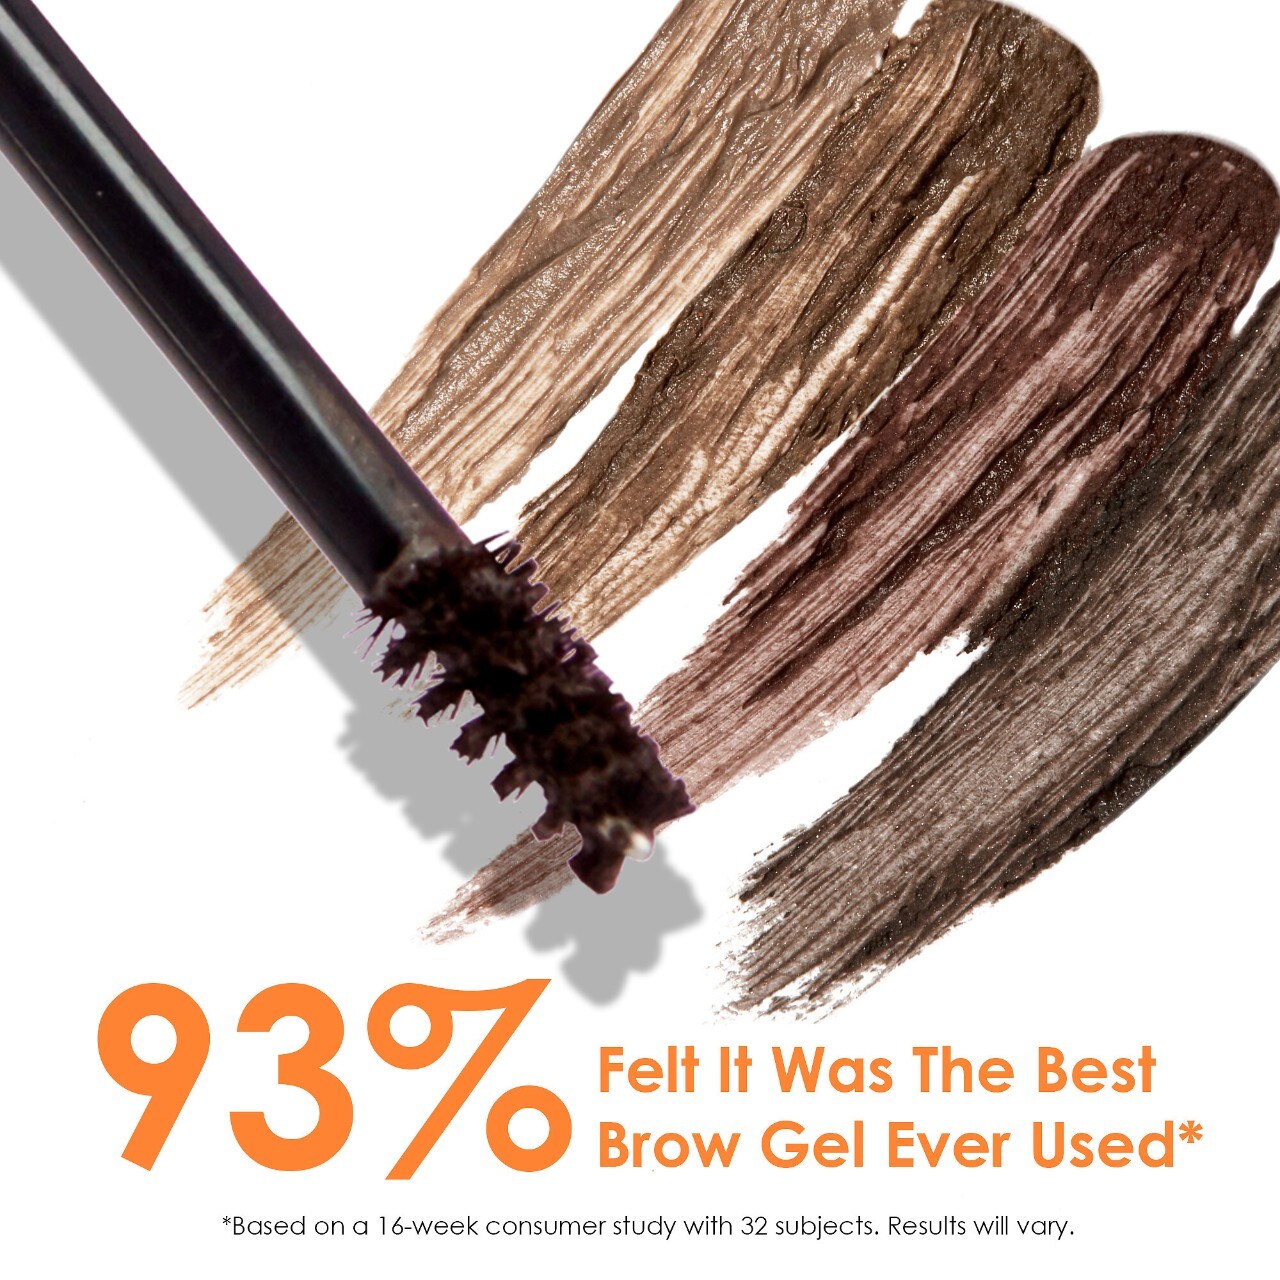 93% felt it was the best brow gel ever used - call for details